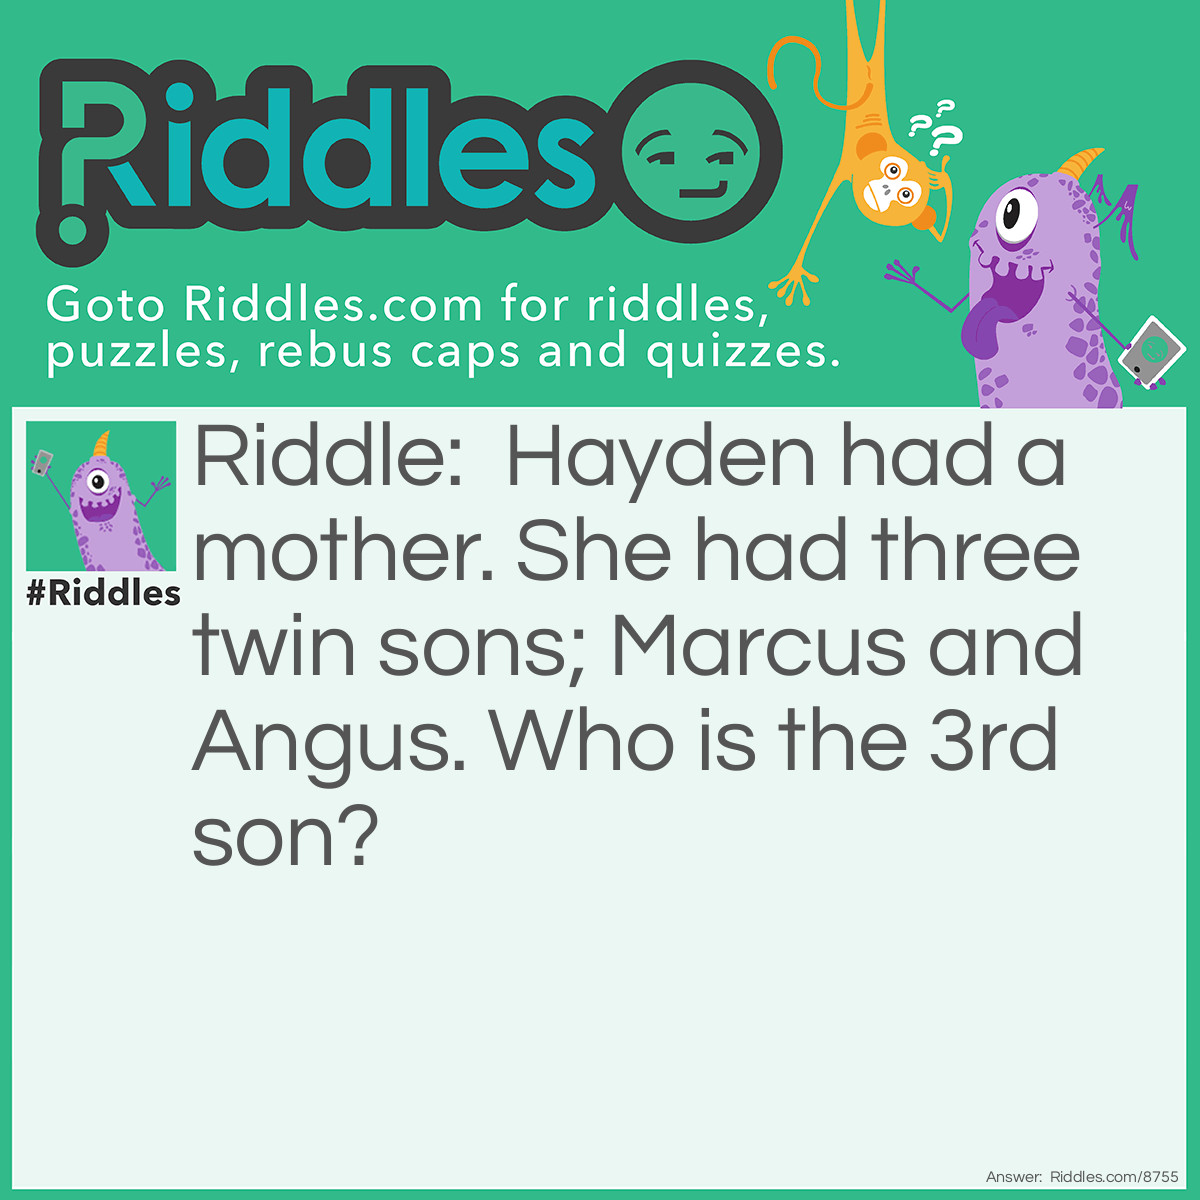 Riddle: Hayden had a mother. She had three twin sons; Marcus and Angus. Who is the 3rd son? Answer: Hayden!